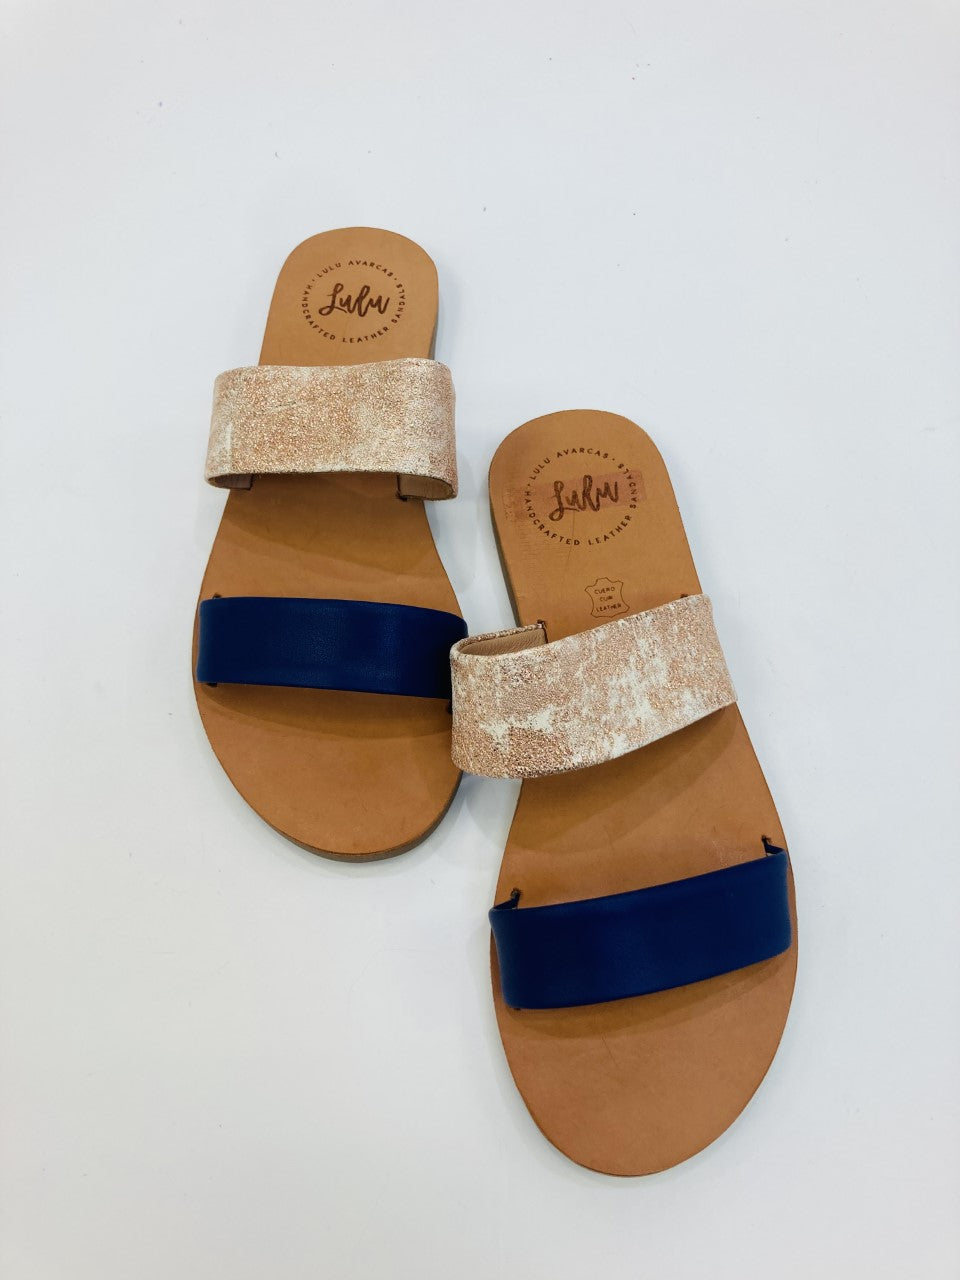 LULU AVARCAS LEATHER 2 STRAP SLIDE IN NAVY AND ROSE GOLD